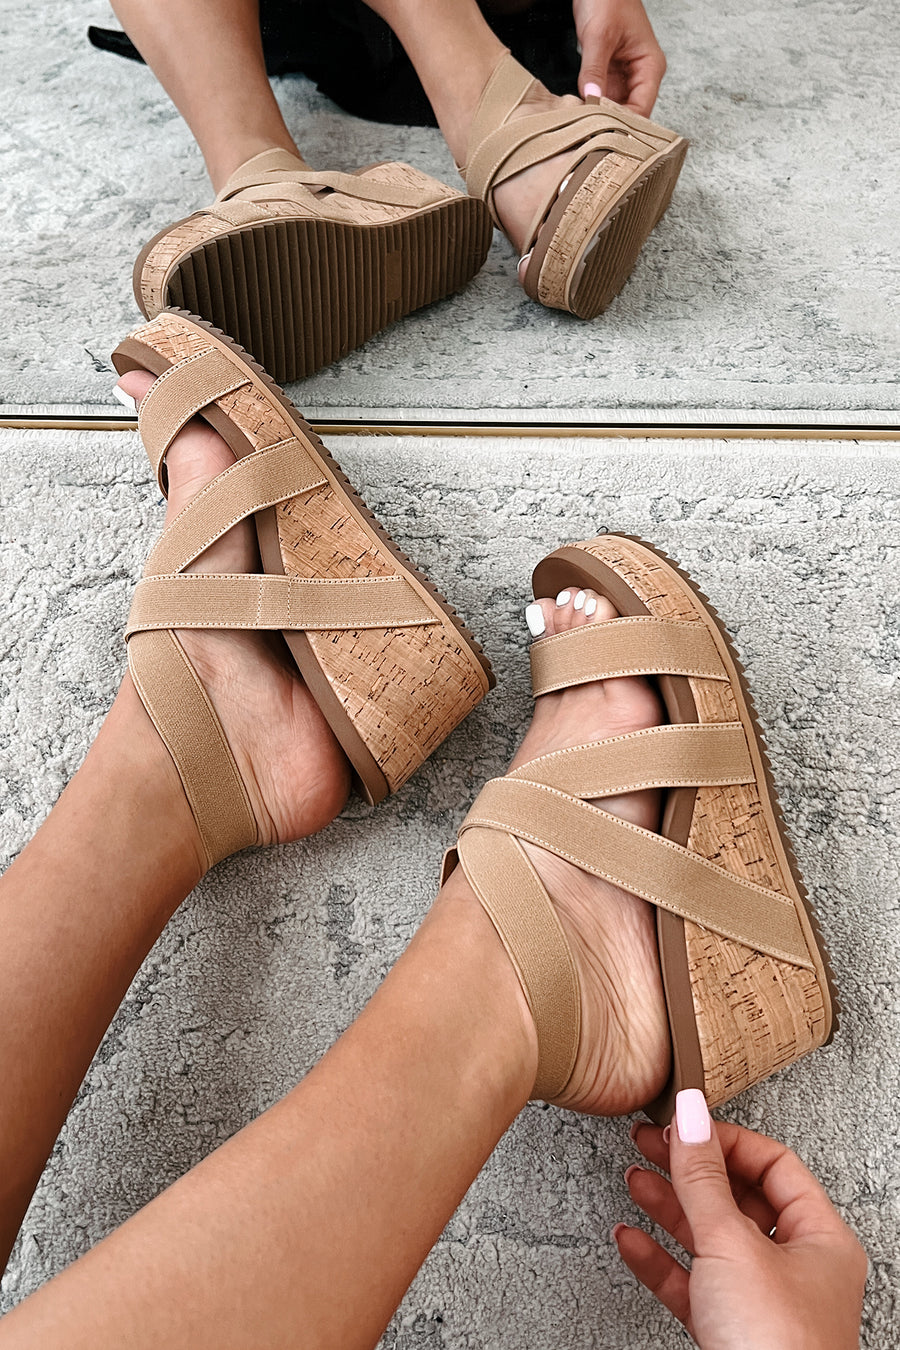 Quirky But Cute Cork Wedge Sandals (Camel)